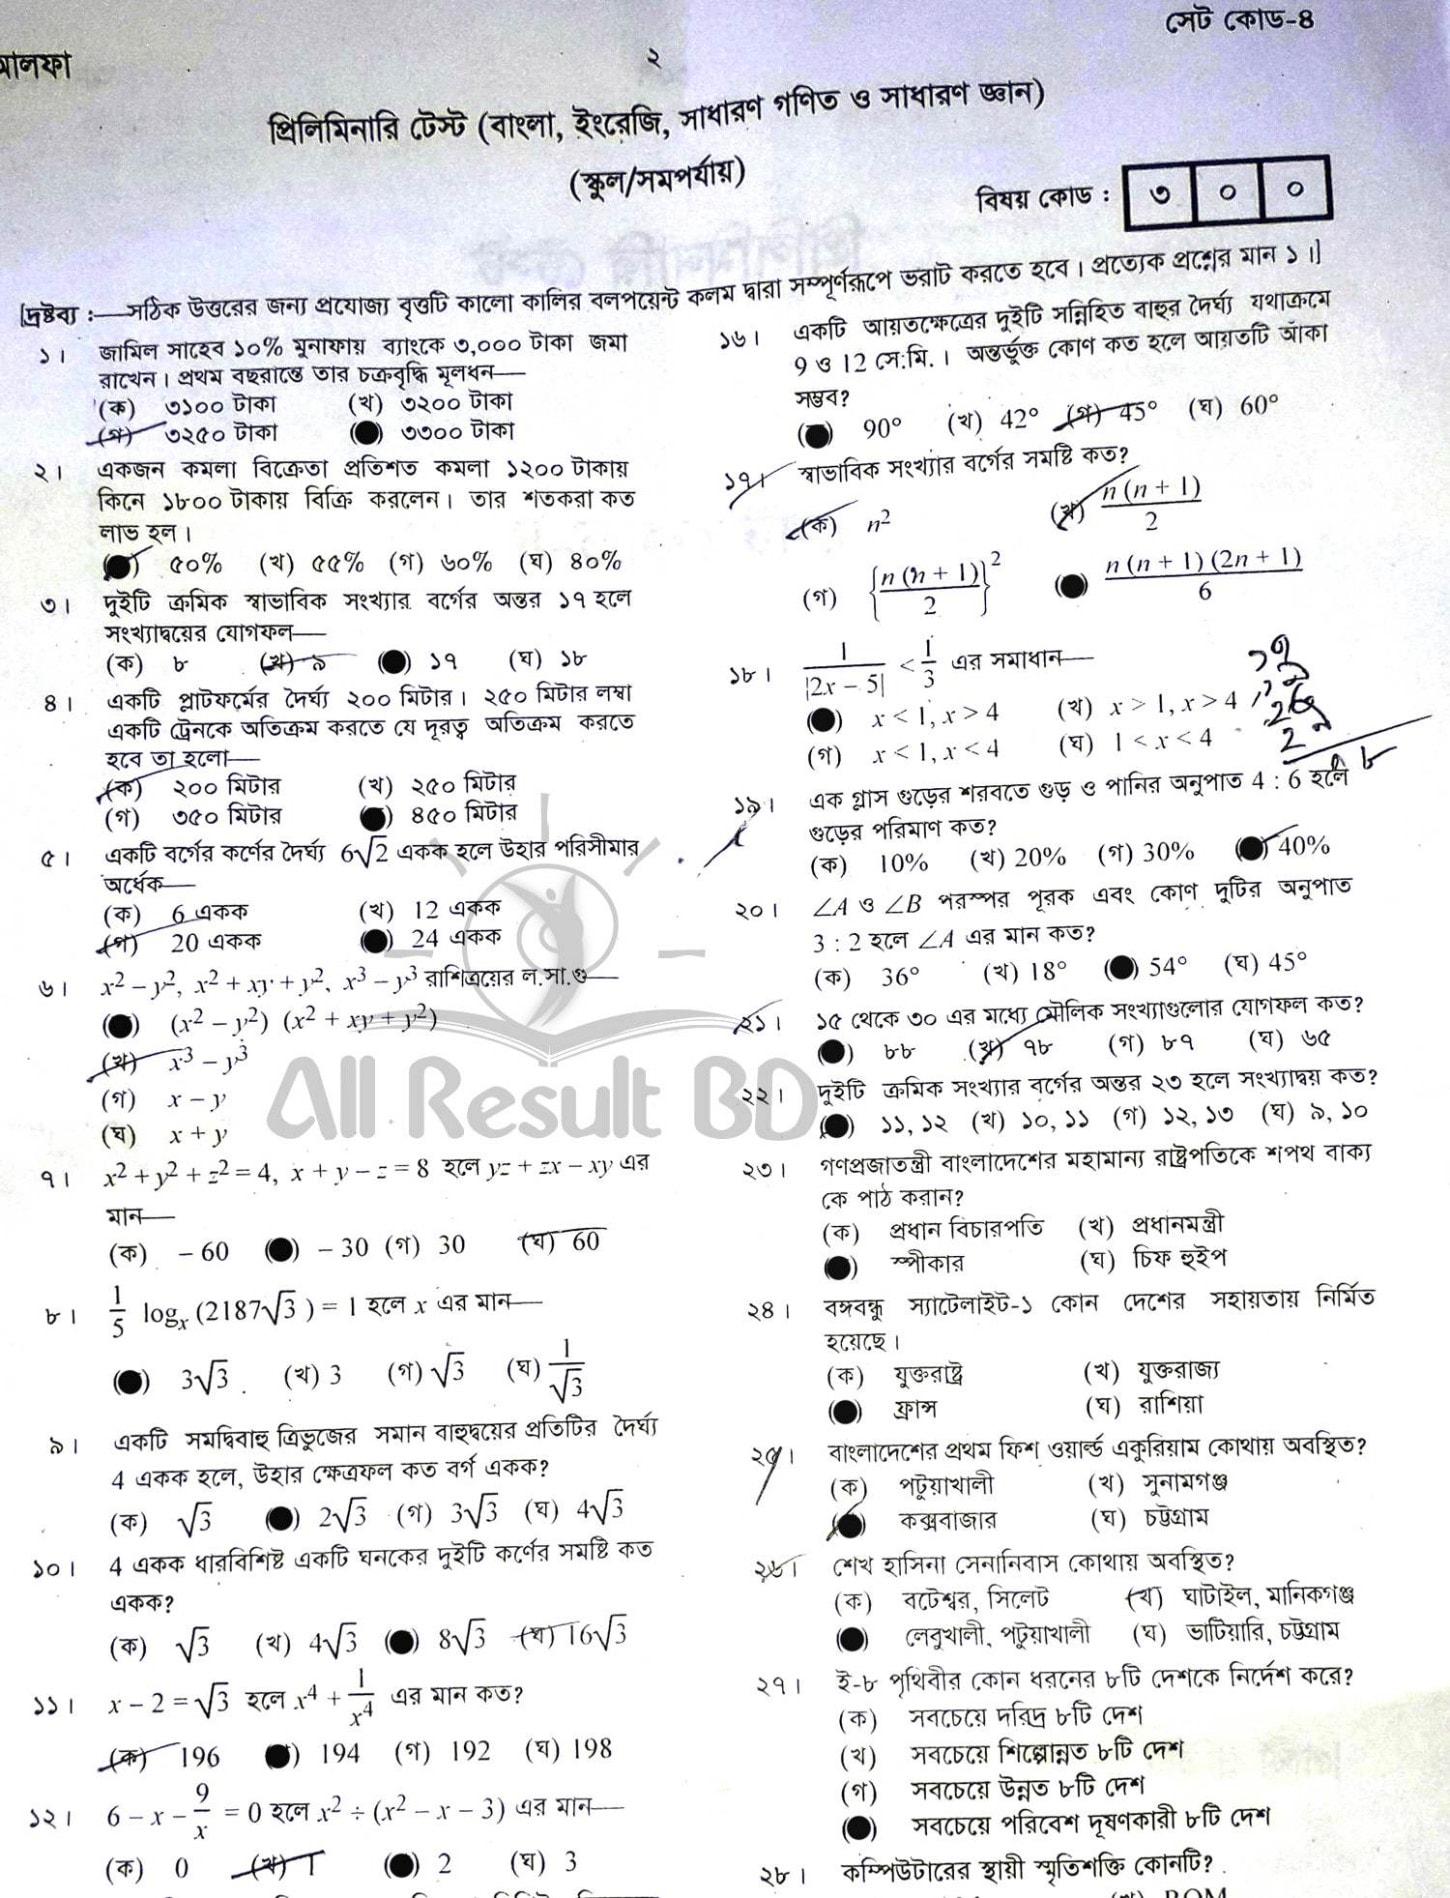 Download 15th NTRCA Question Solution 2019 School Level 1